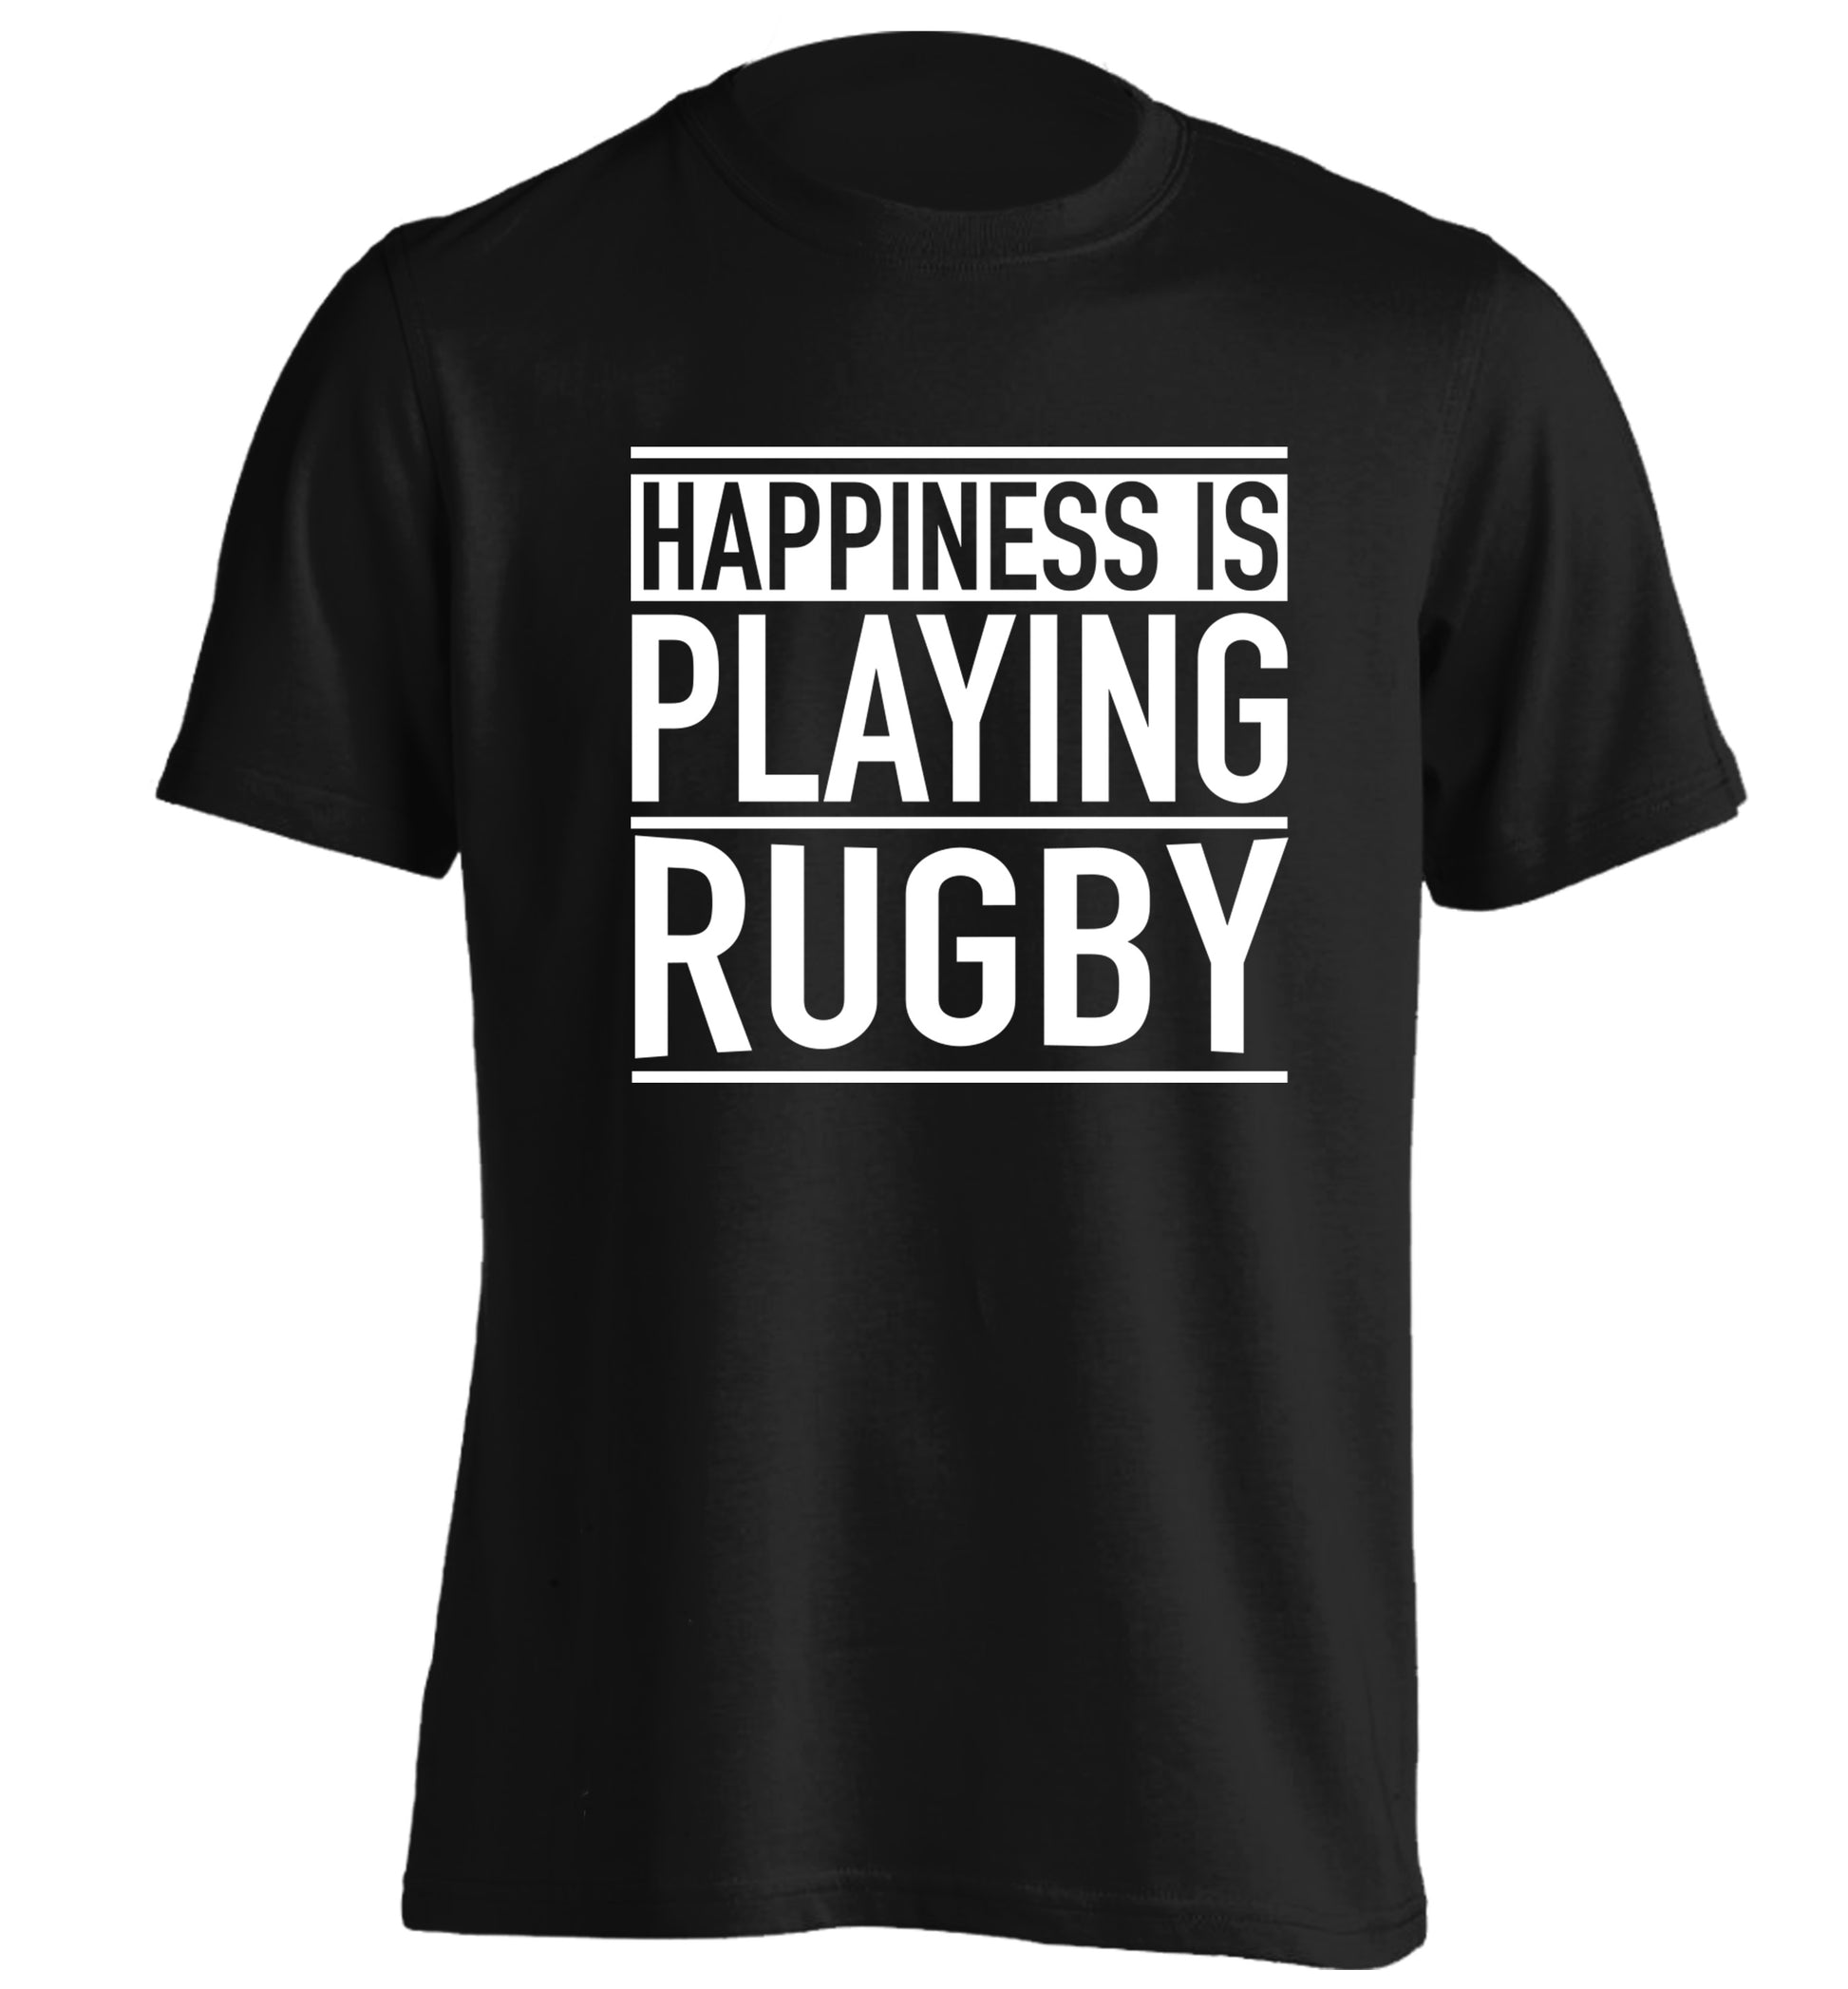 Happiness is playing rugby adults unisex black Tshirt 2XL